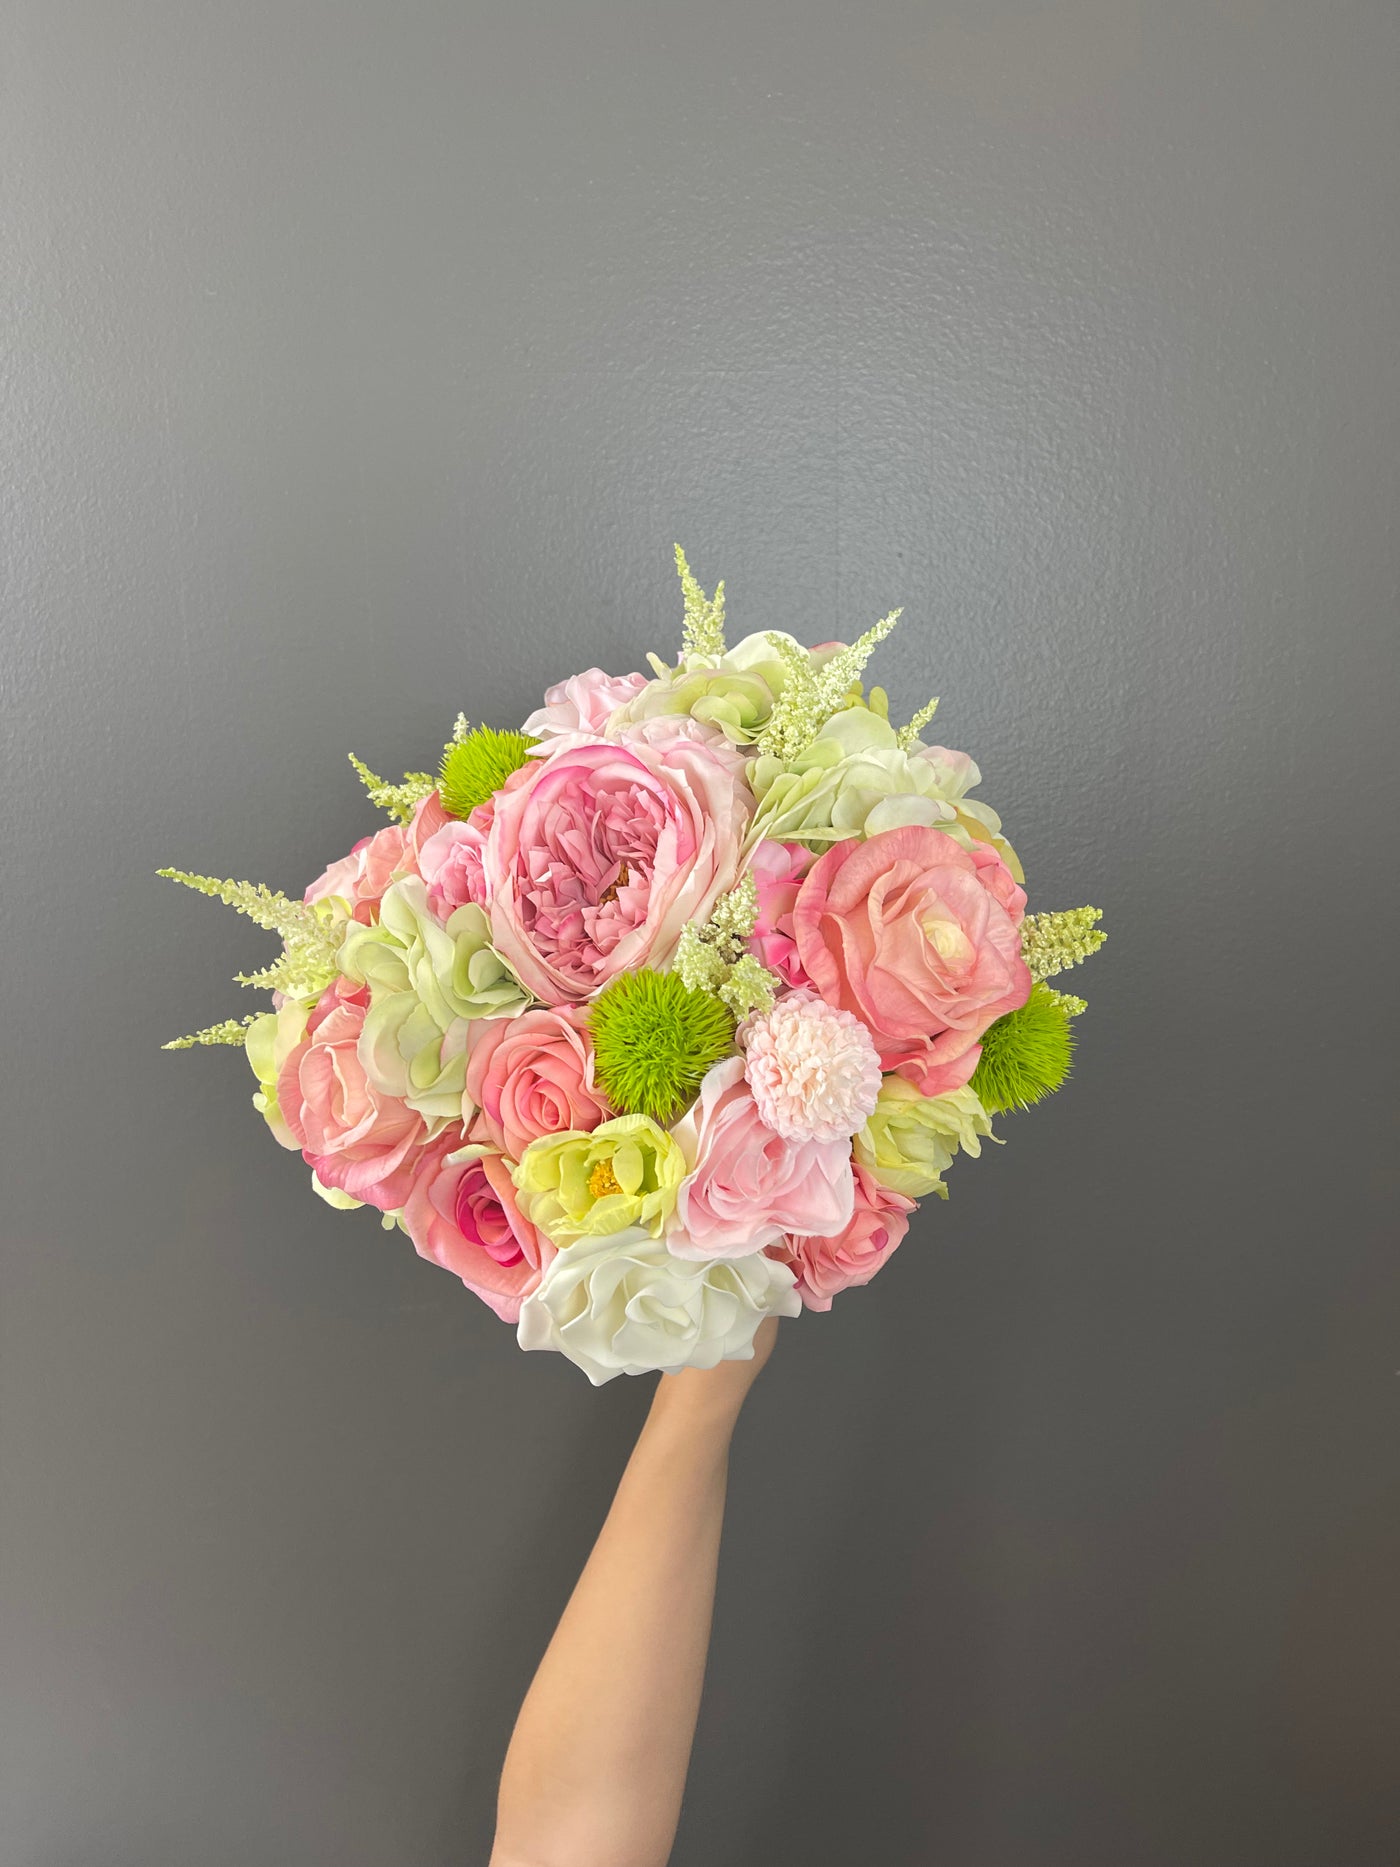 Bridal Bouquet in Cotton Candy